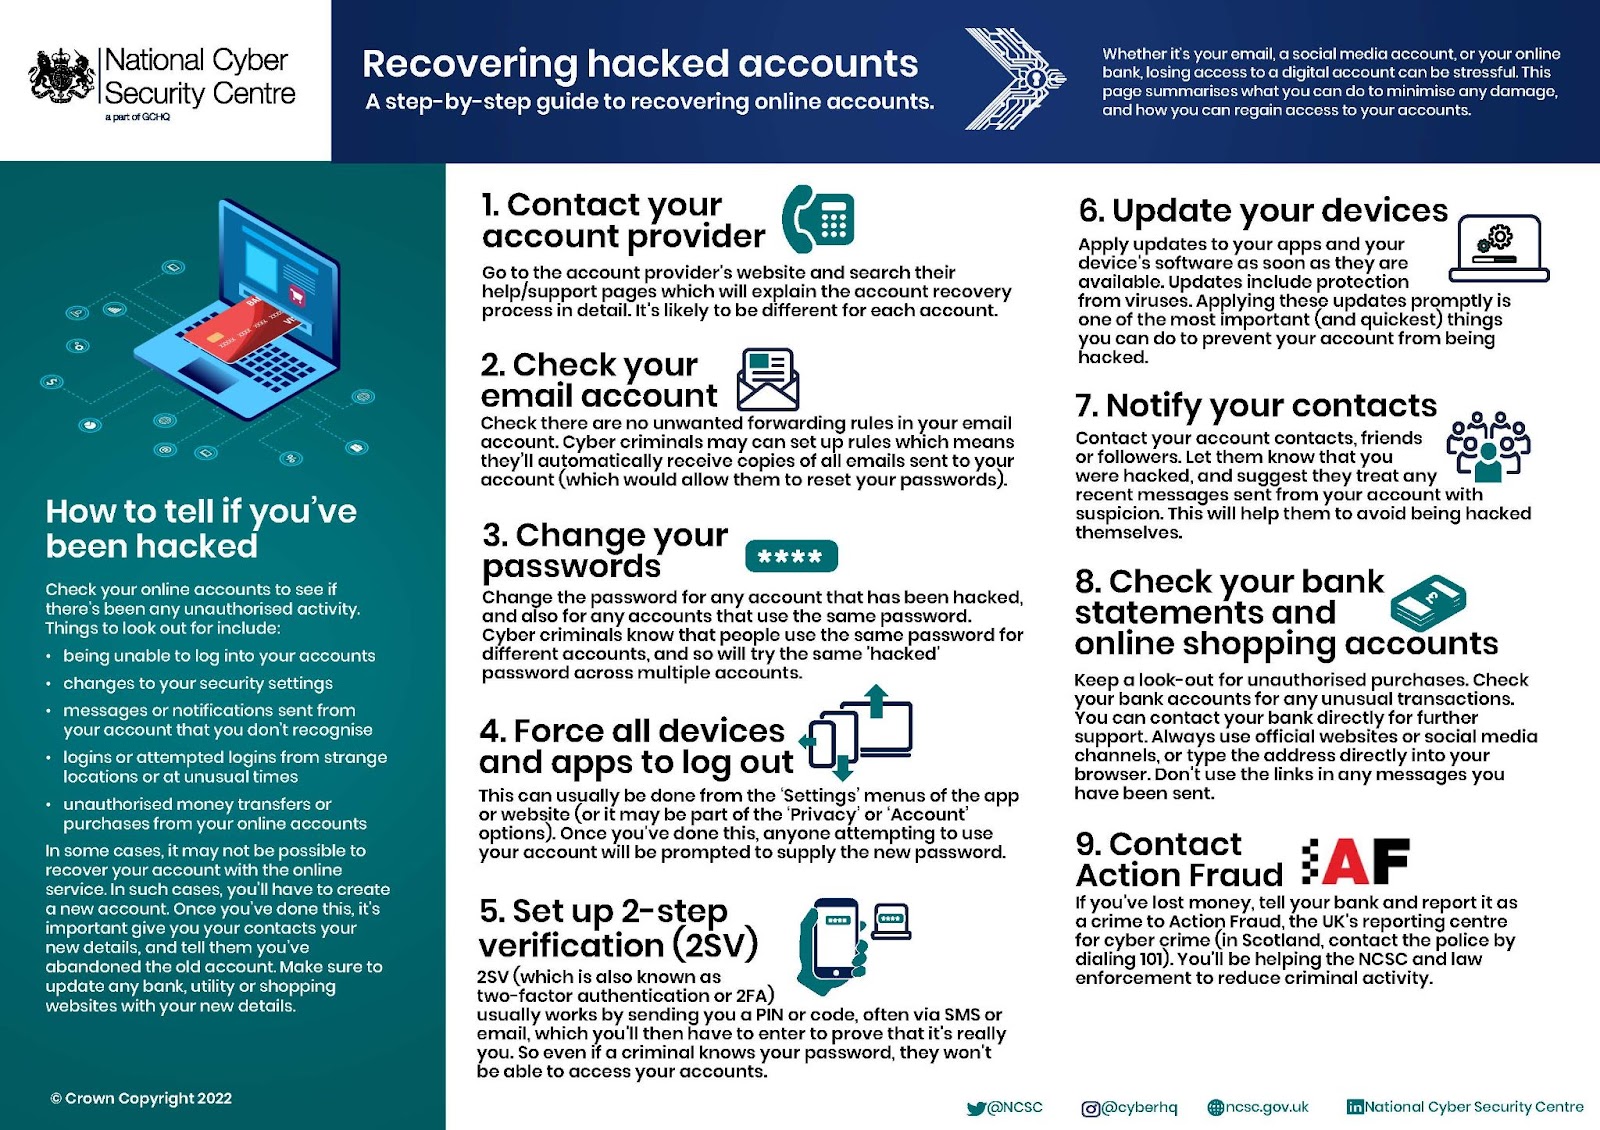 9 Steps to Recovering Hacked Accounts (The Essential Guide)